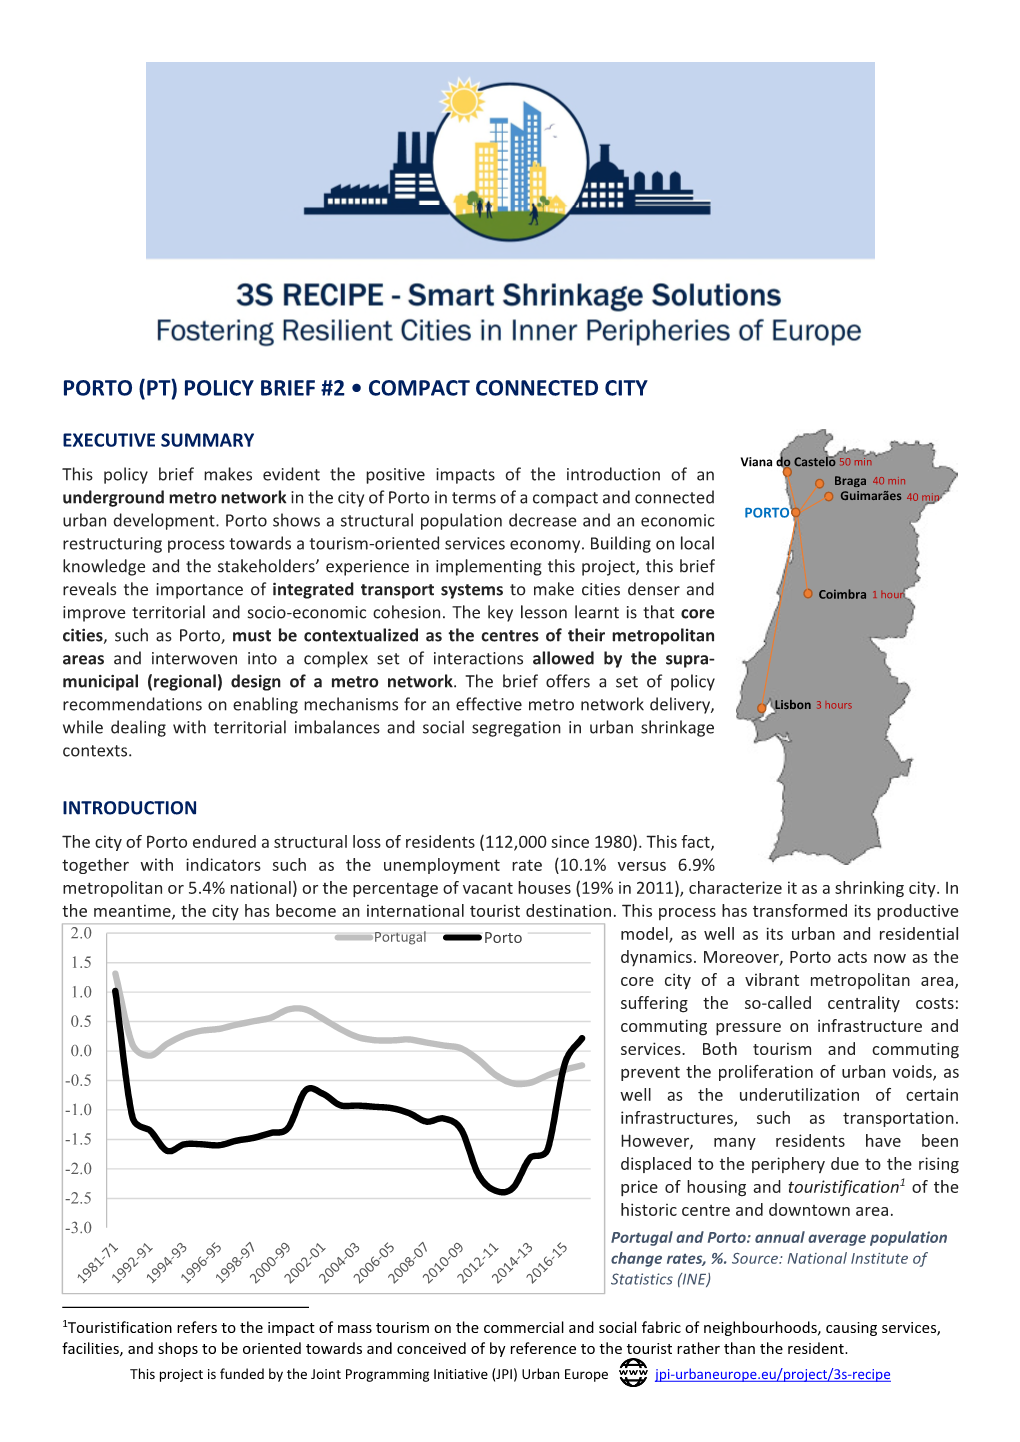 Porto (Pt) Policy Brief #2 • Compact Connected City